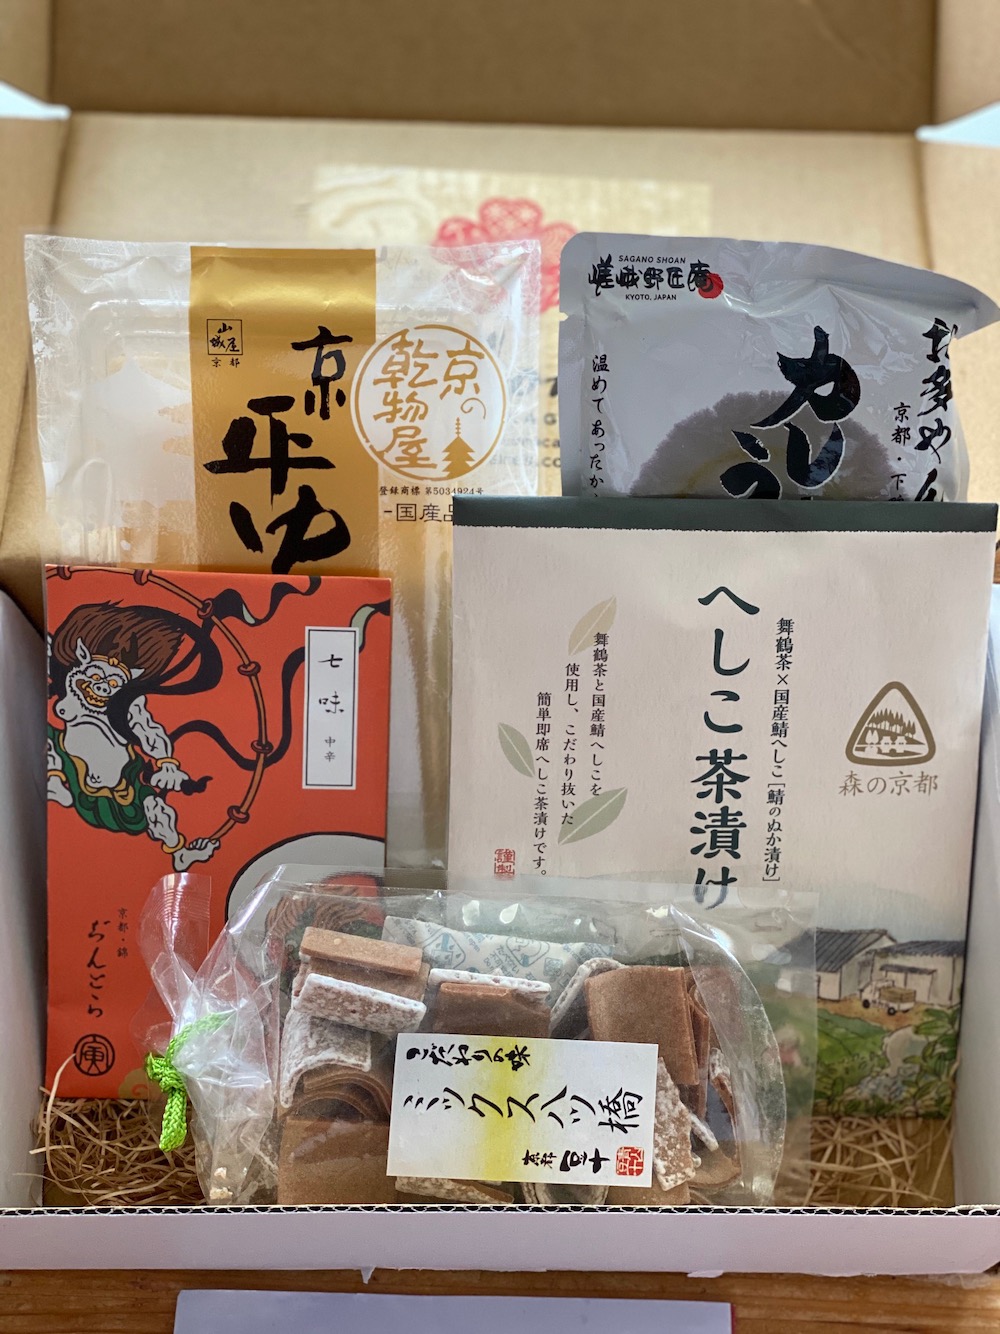 Stay Connected to Japan with Kokoro Care Packages